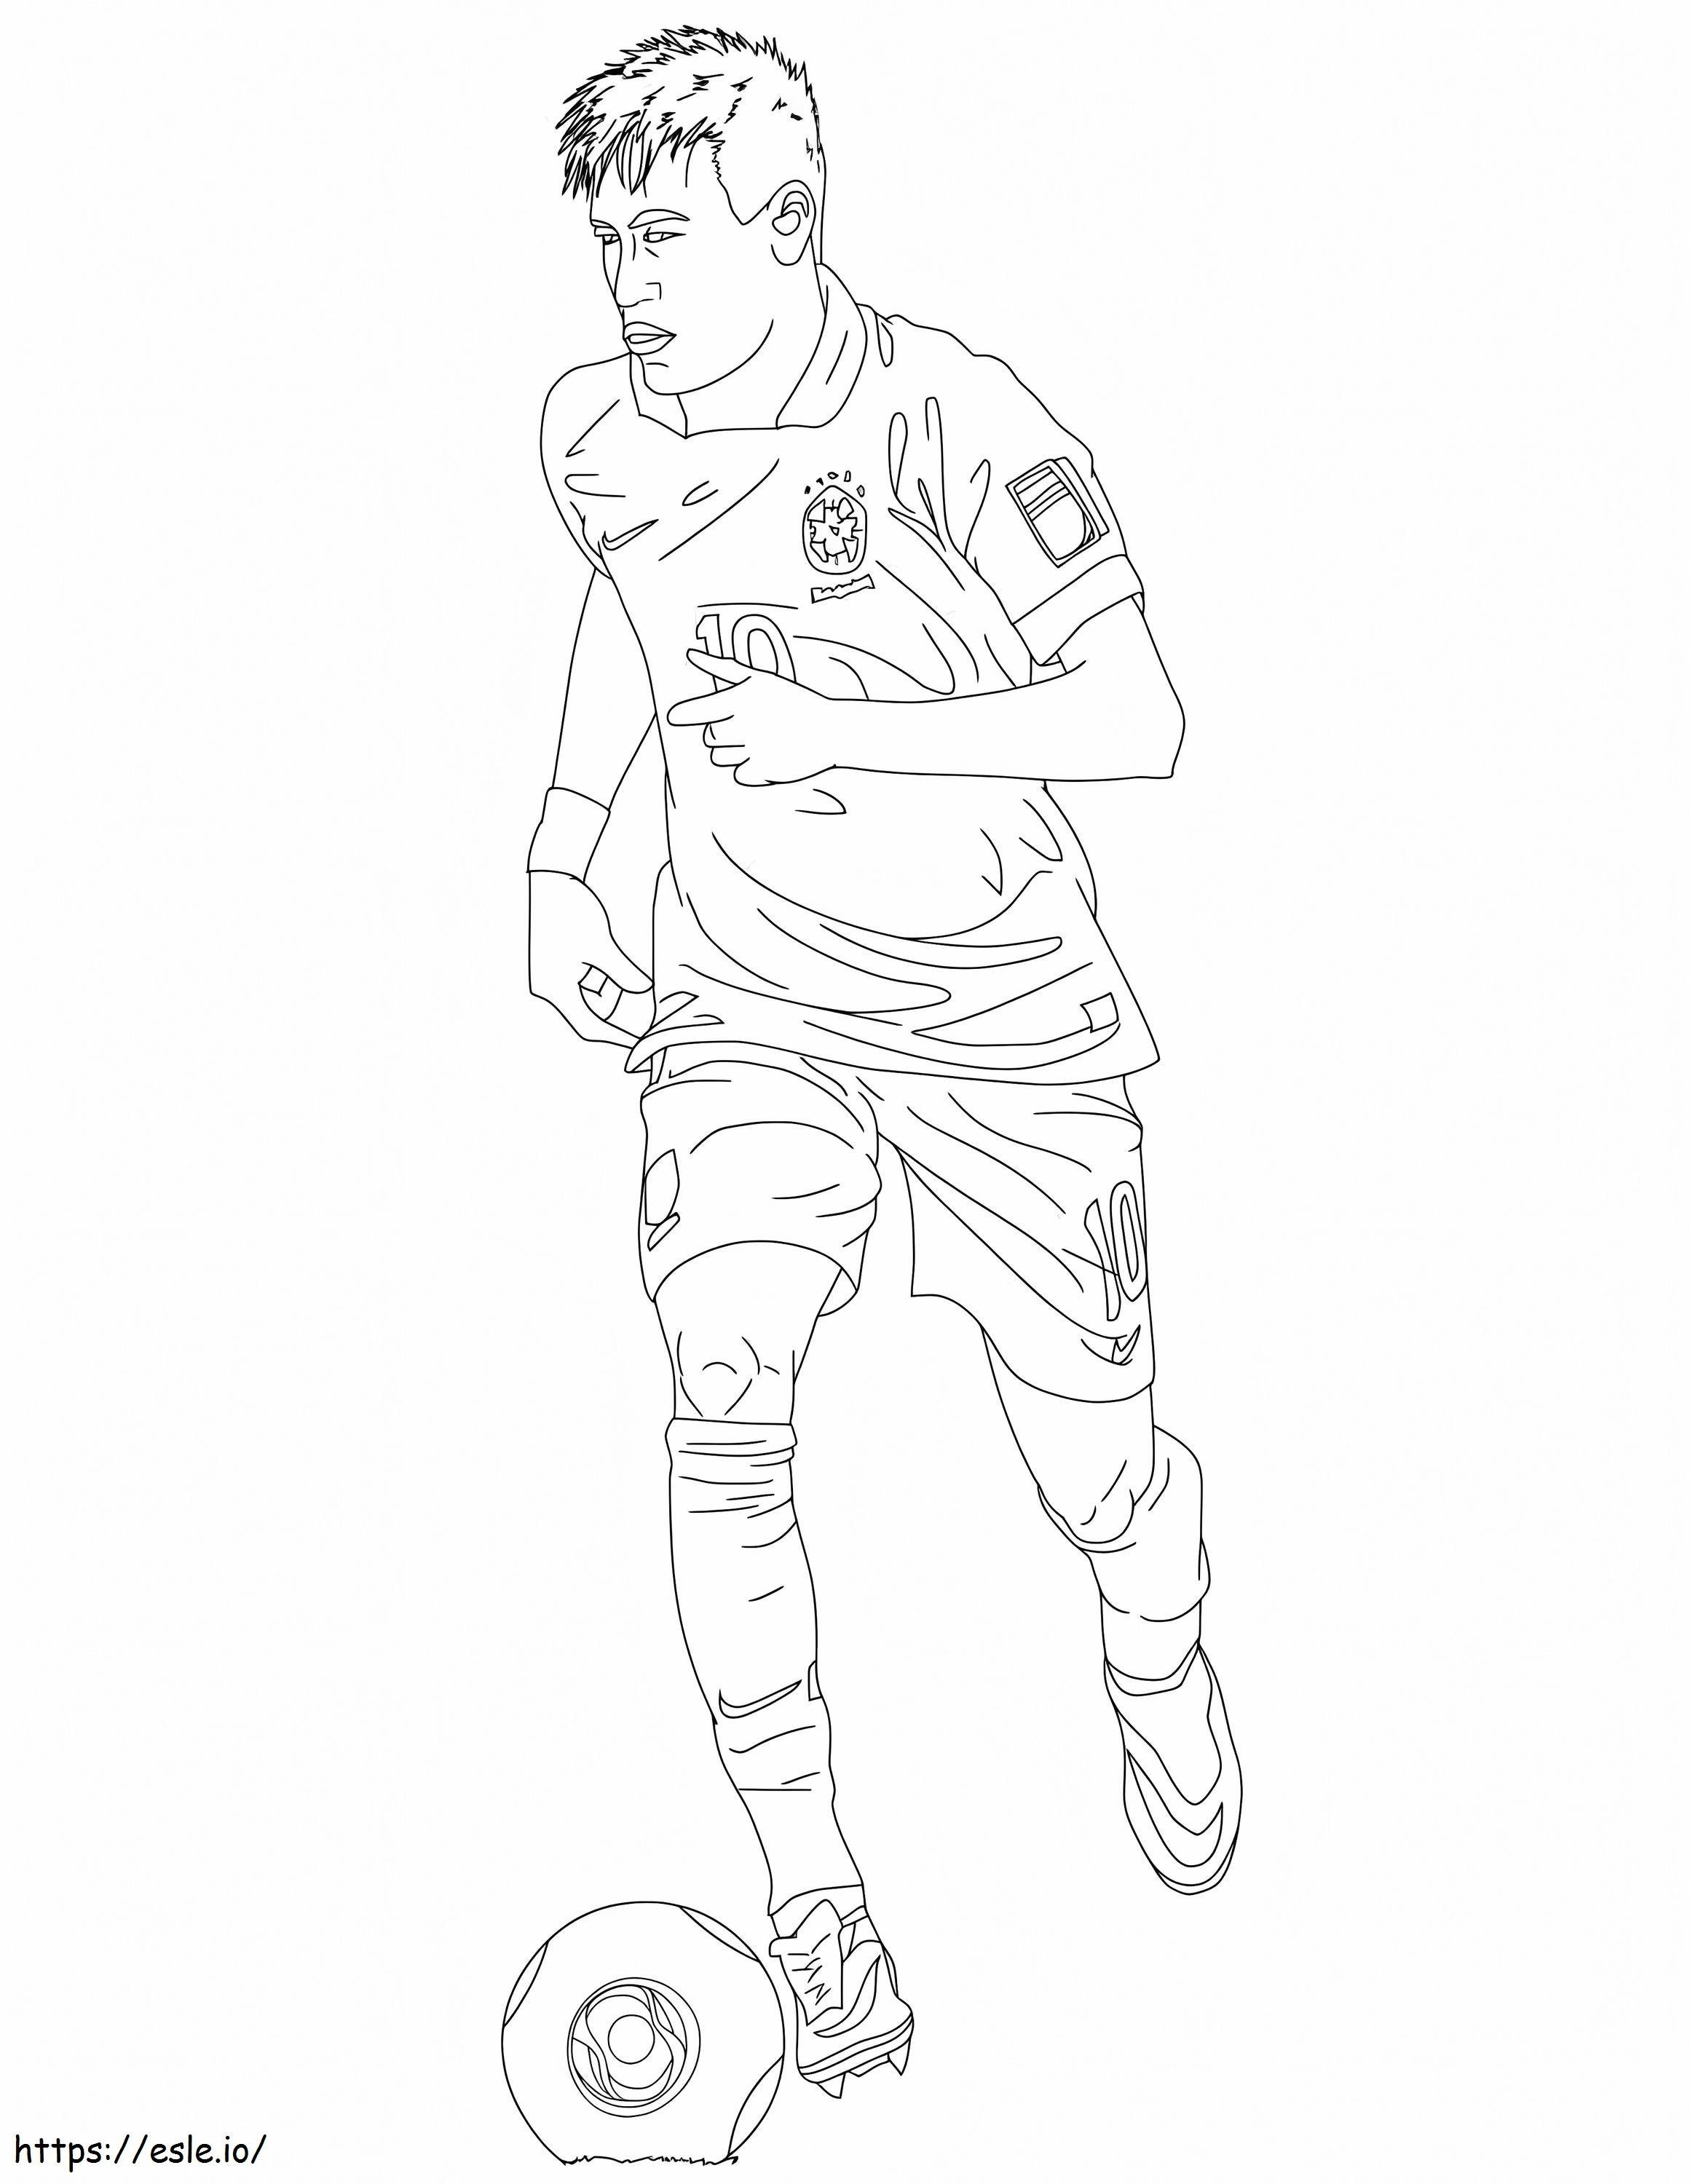 Neymar Playing Soccer coloring page